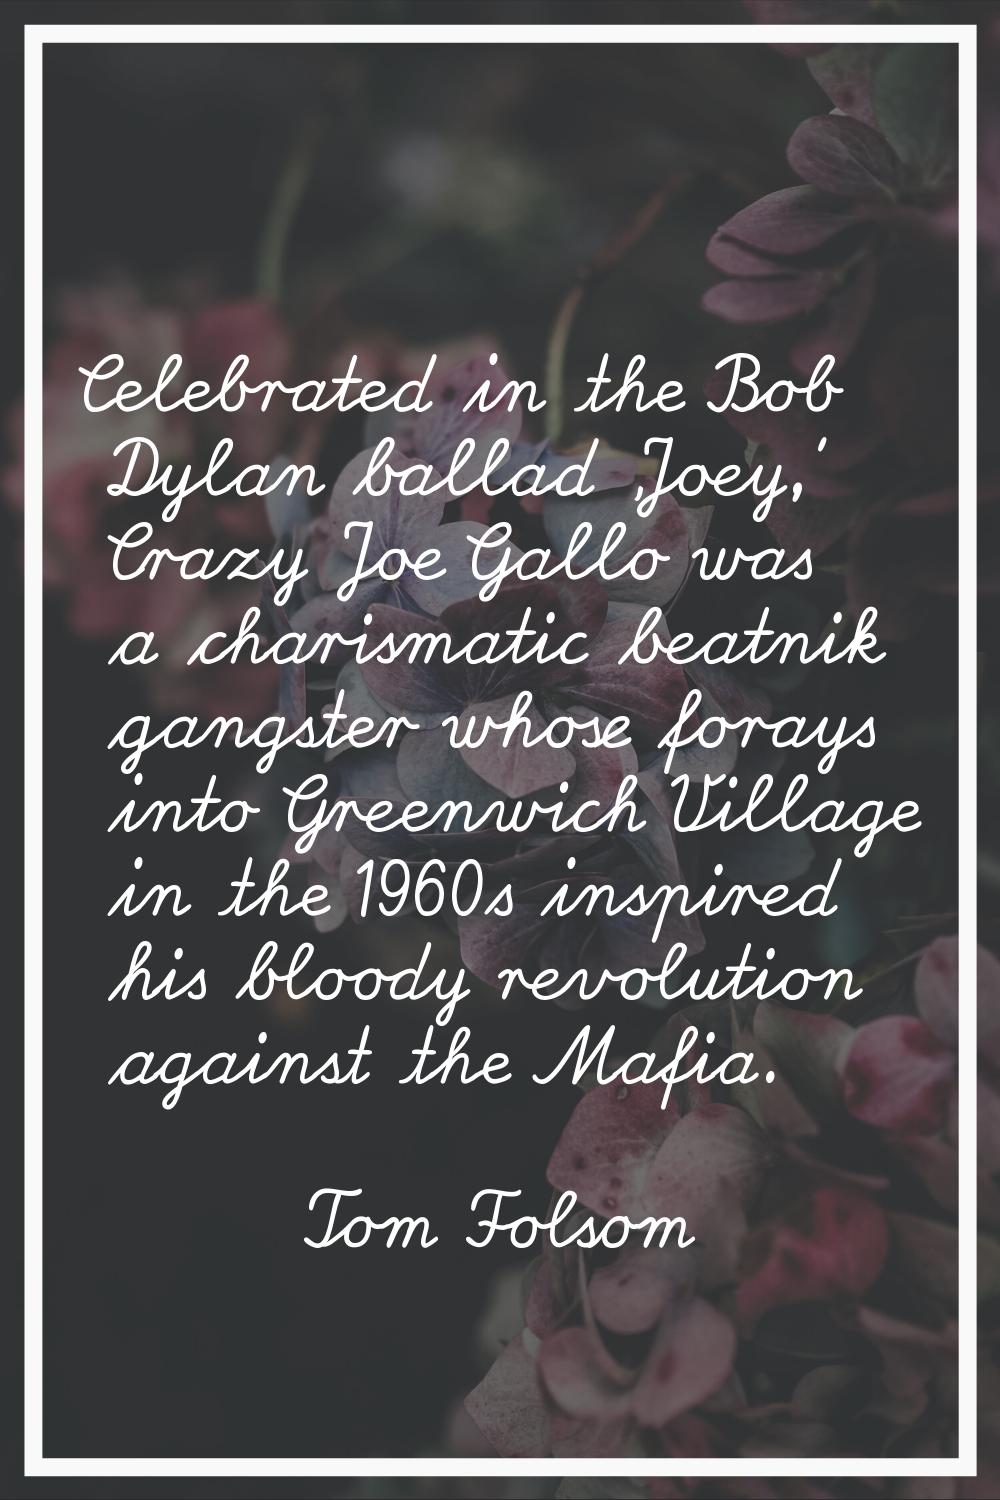 Celebrated in the Bob Dylan ballad 'Joey,' Crazy Joe Gallo was a charismatic beatnik gangster whose